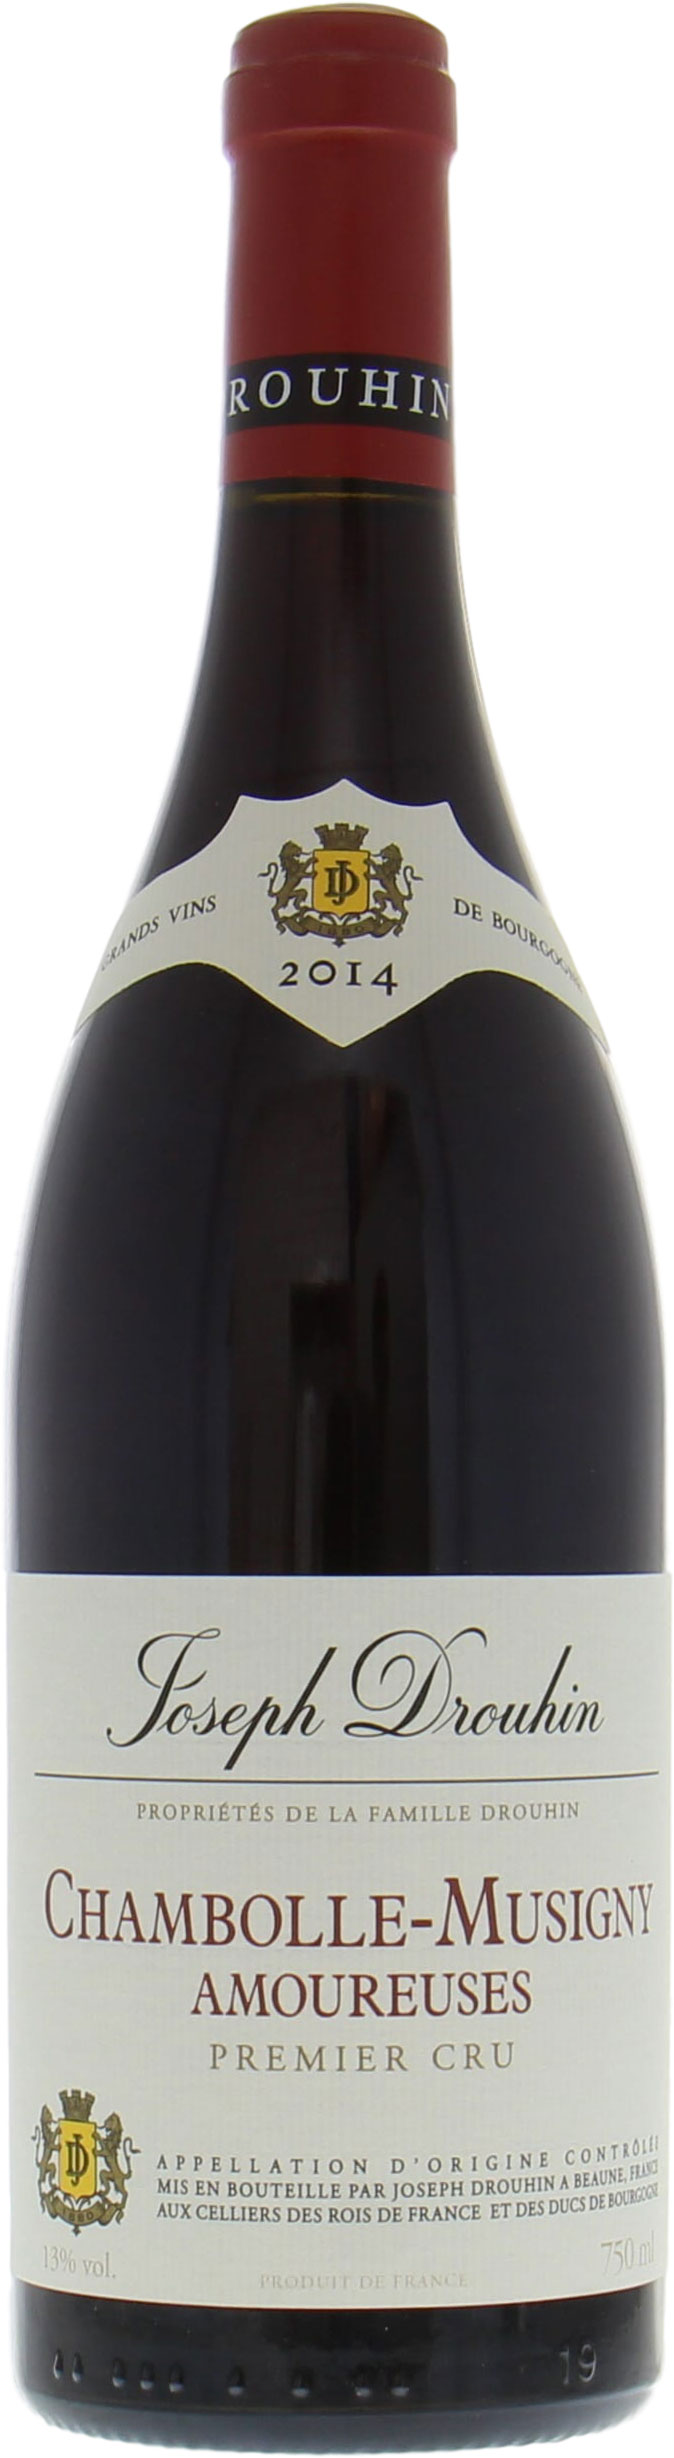 Drouhin, Joseph - Chambolle Musigny Les Amoureuses 2014 Perfect